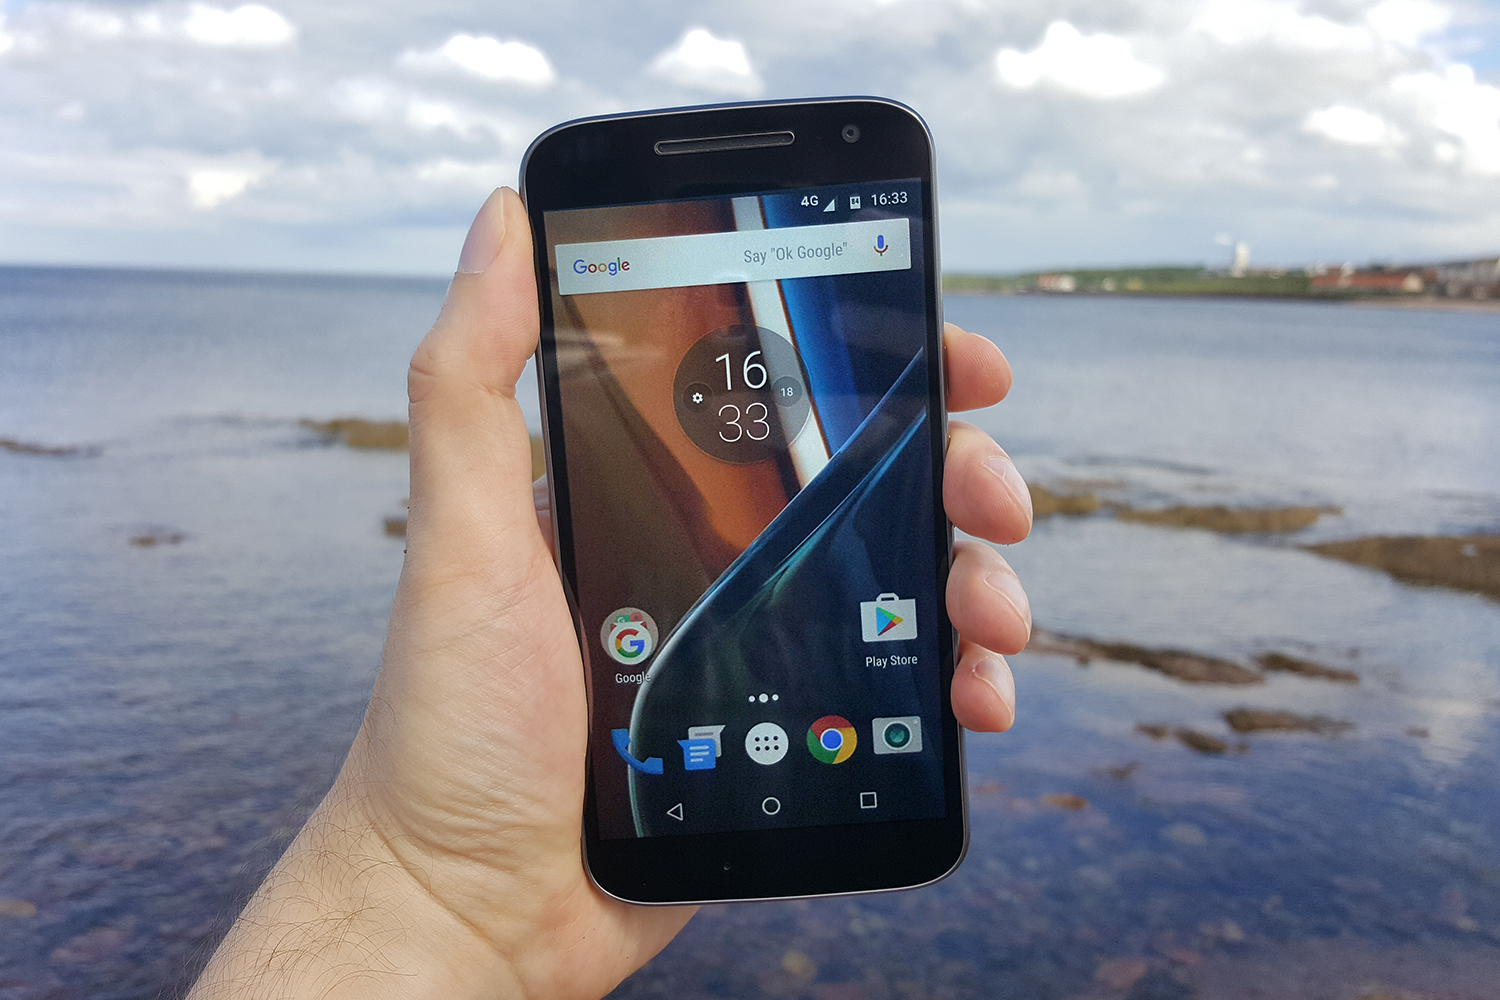 Connect to Wi-Fi - Motorola Moto G4 Play - Android 6.0 - Device Guides